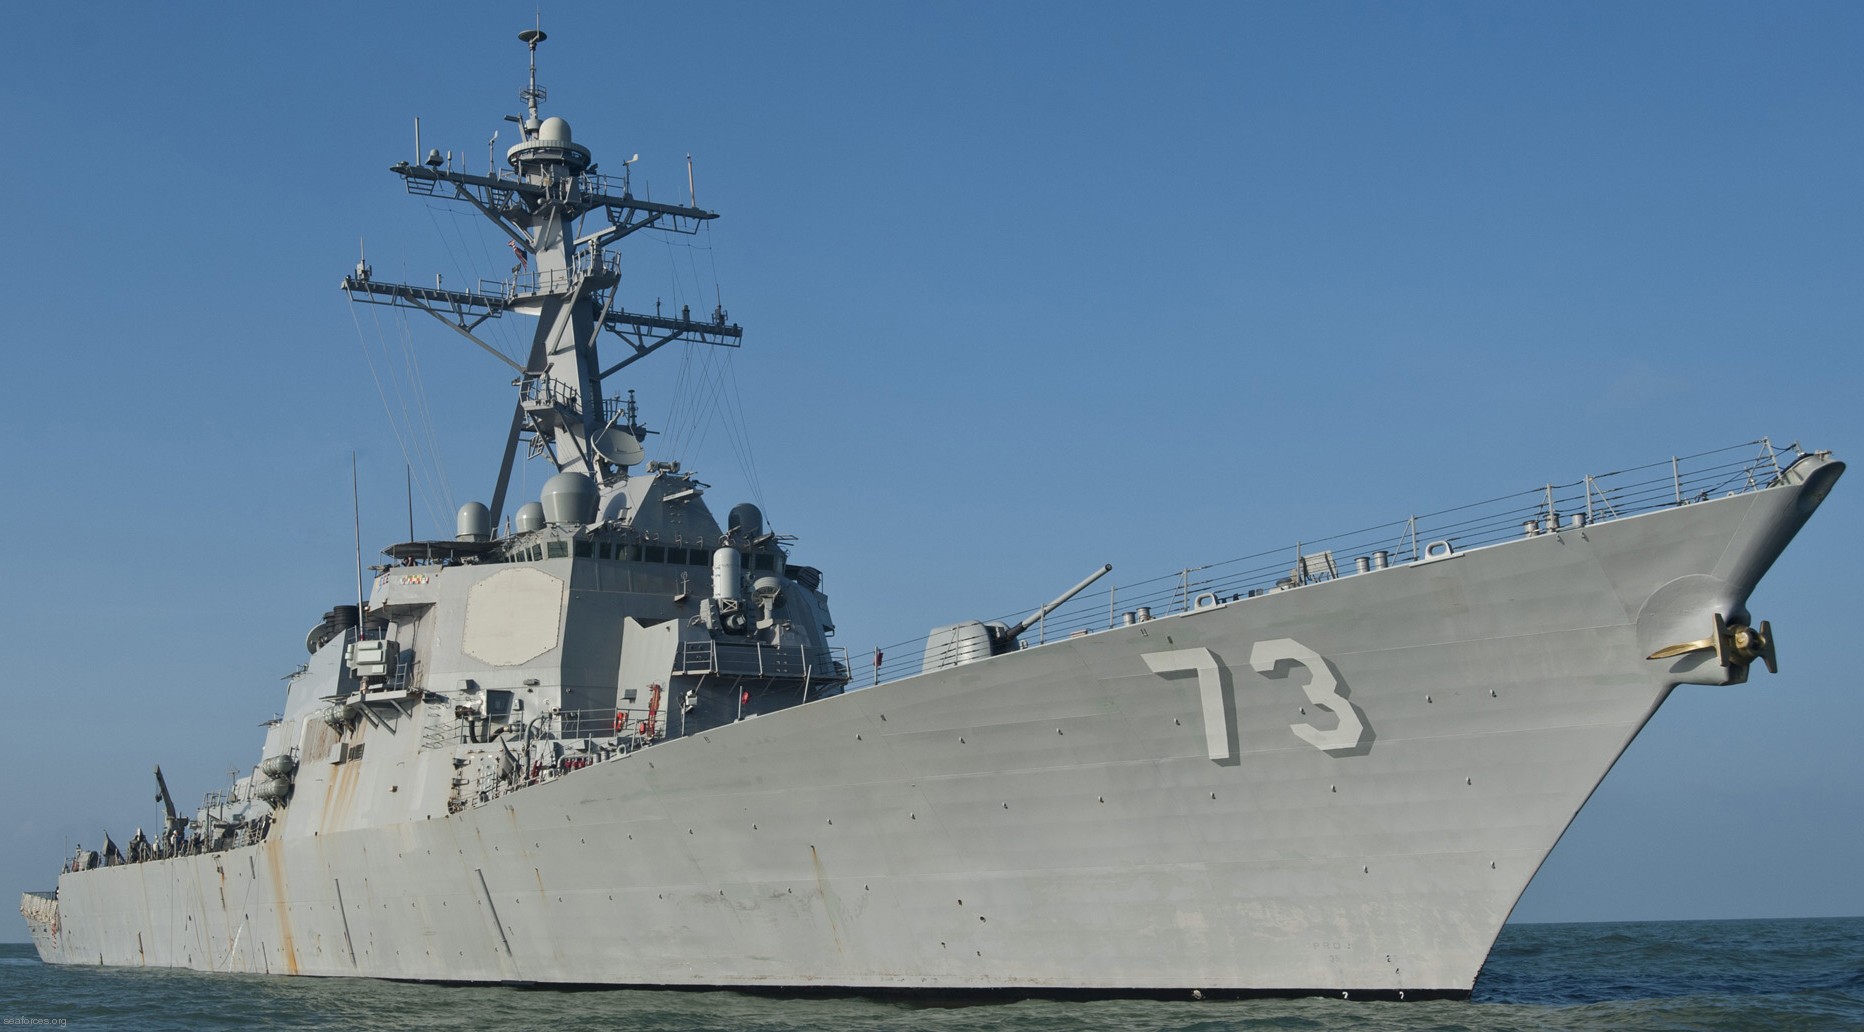 ddg-73 uss decatur guided missile destroyer arleigh burke class aegis bmd 22